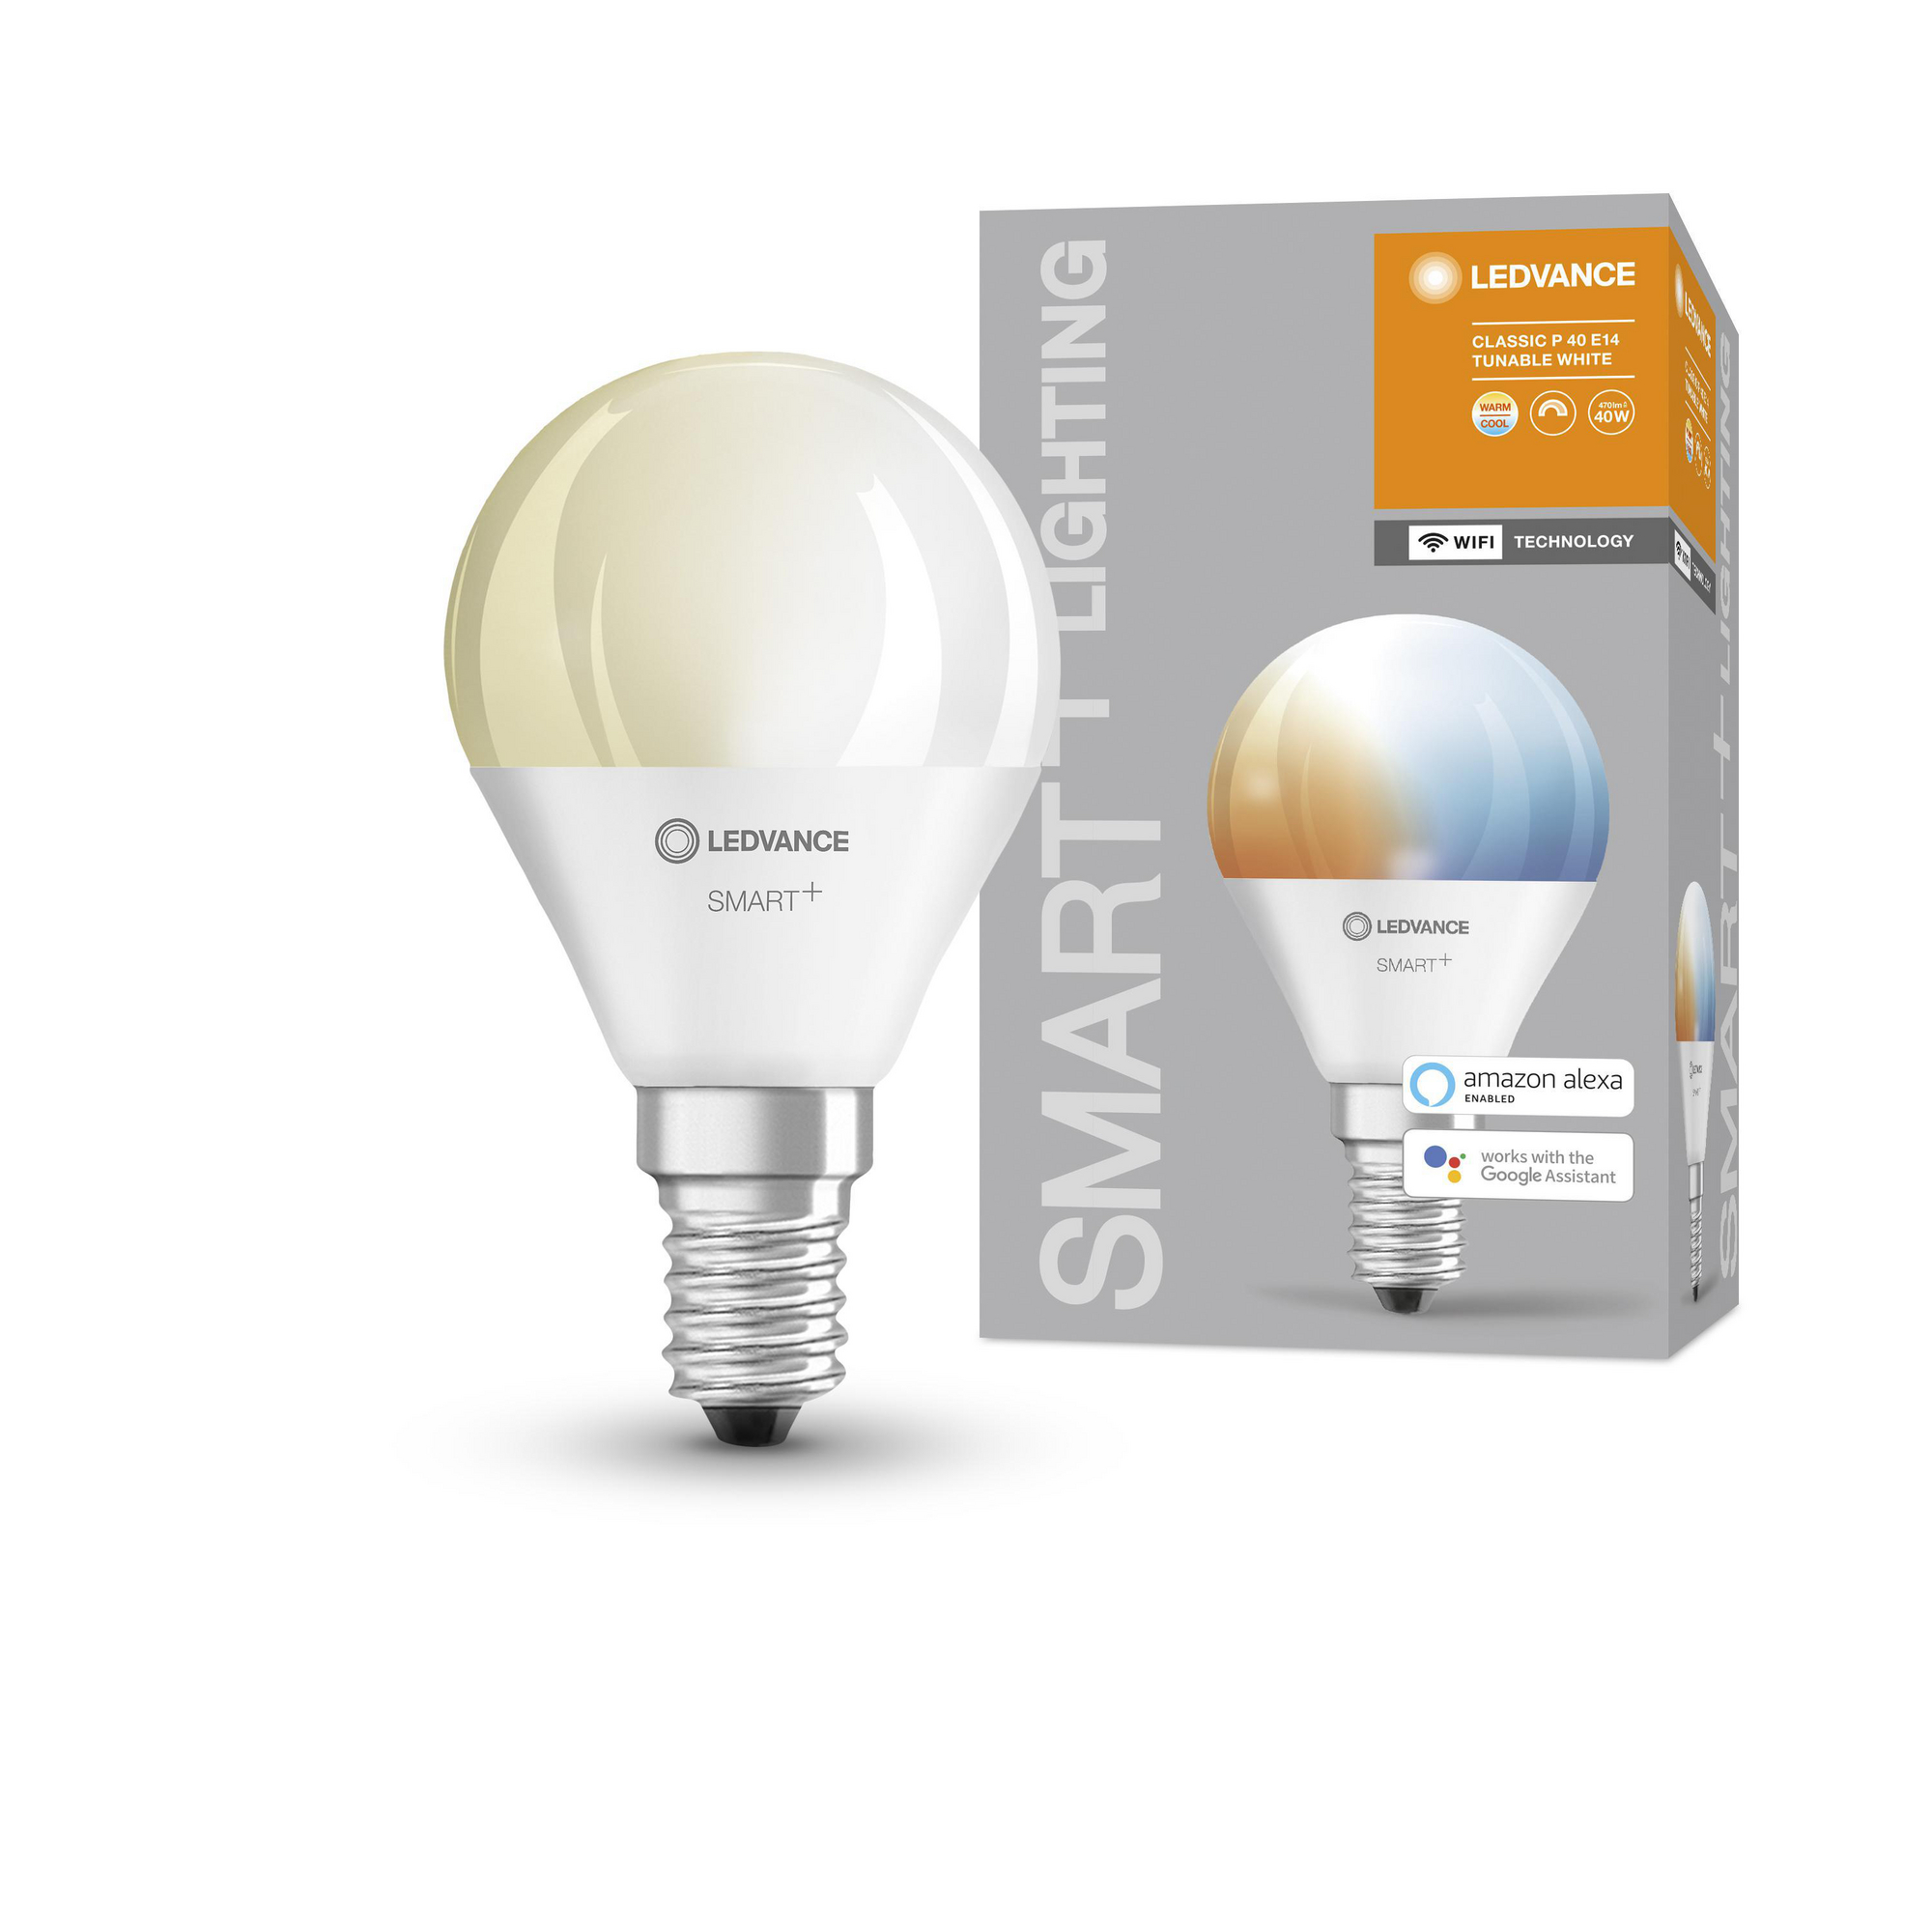 LED-Lampe 'Smart+' 8,9 cm 470 lm 5 W E14 weiß WLAN Tunable White + product picture